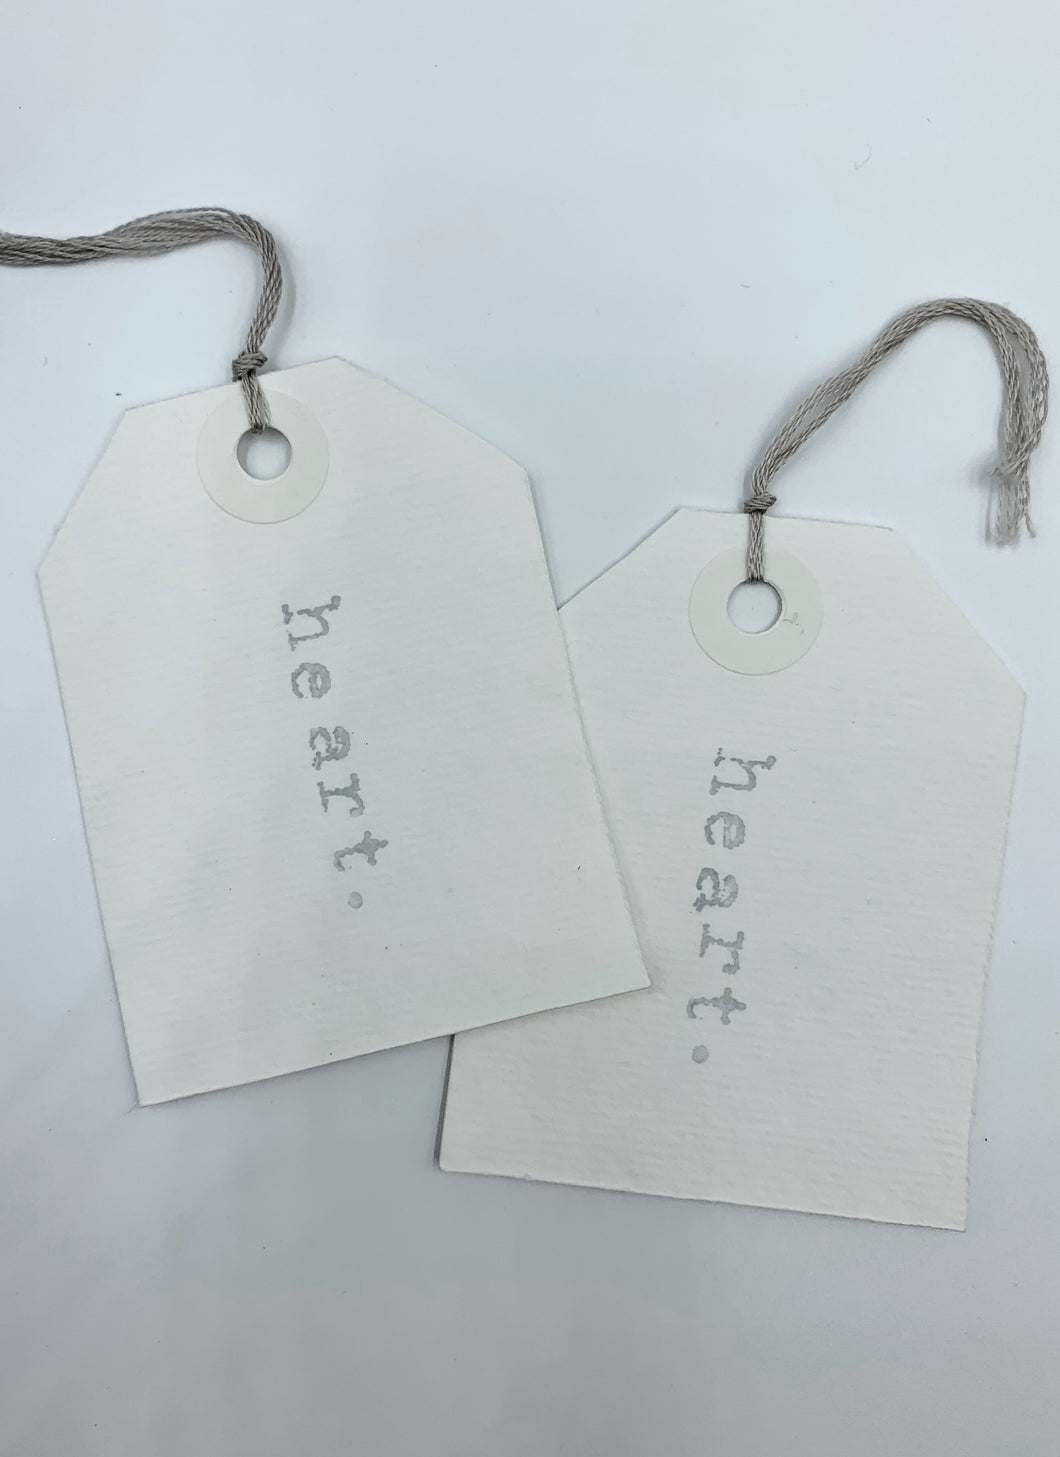 Heart Gift Tag in White 